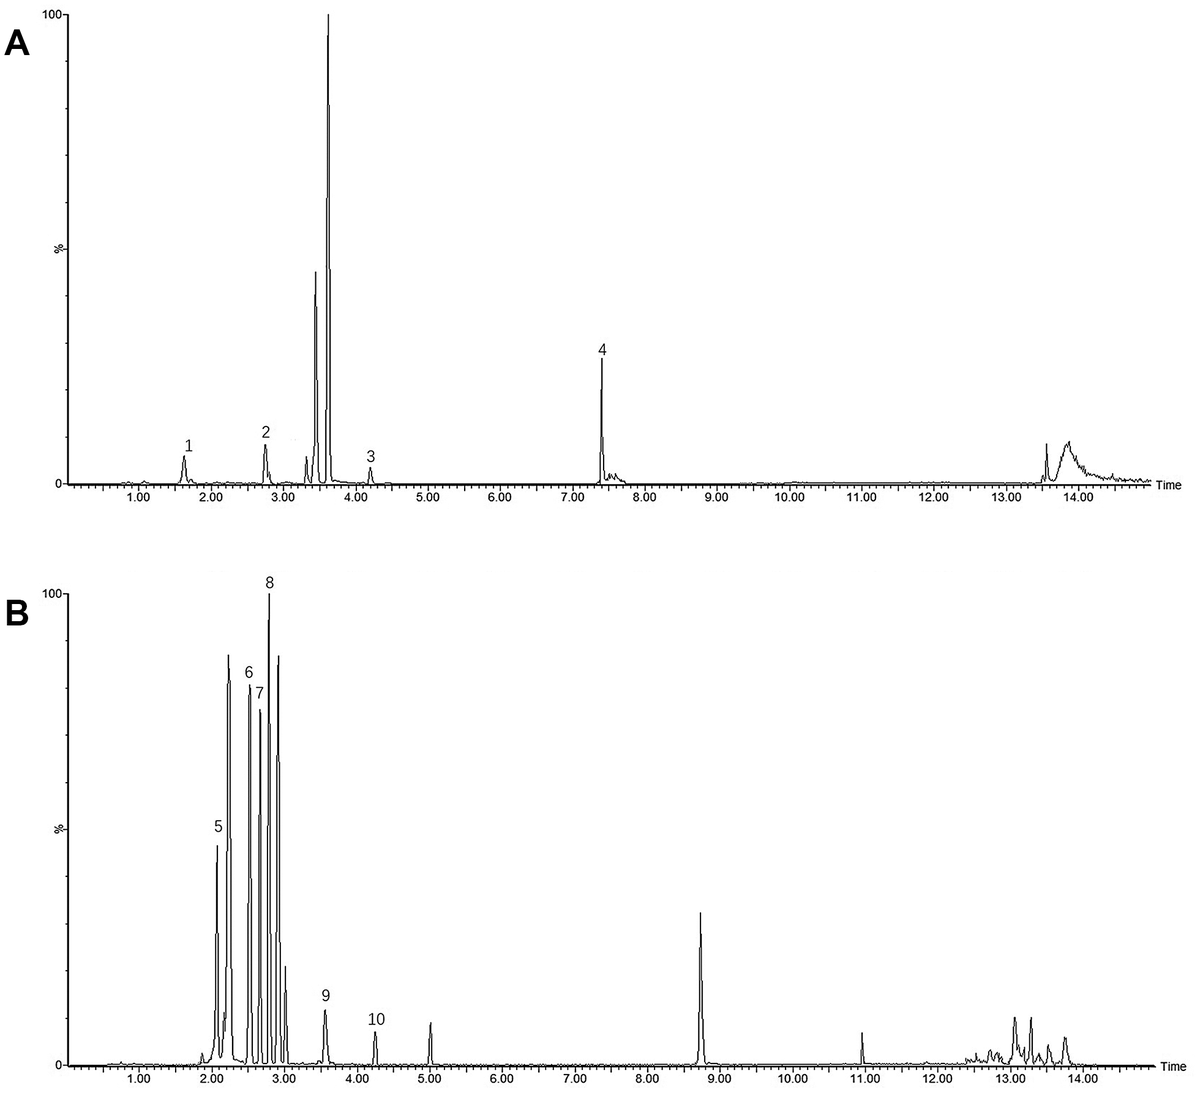 UHPLC-MS/MS spectra and their structures of ten mixture standard compounds in positive mode (A) (1 Geniposidic acid; 2 Coclaurine; 3 Rhynchophylline; 4 Nootkatone) and negative mode (B) (5 Rutin; 6 Echinacoside; 7 Acteoside; 8 Paeoniflorin; 9 Linderane; 10 Quercetin).